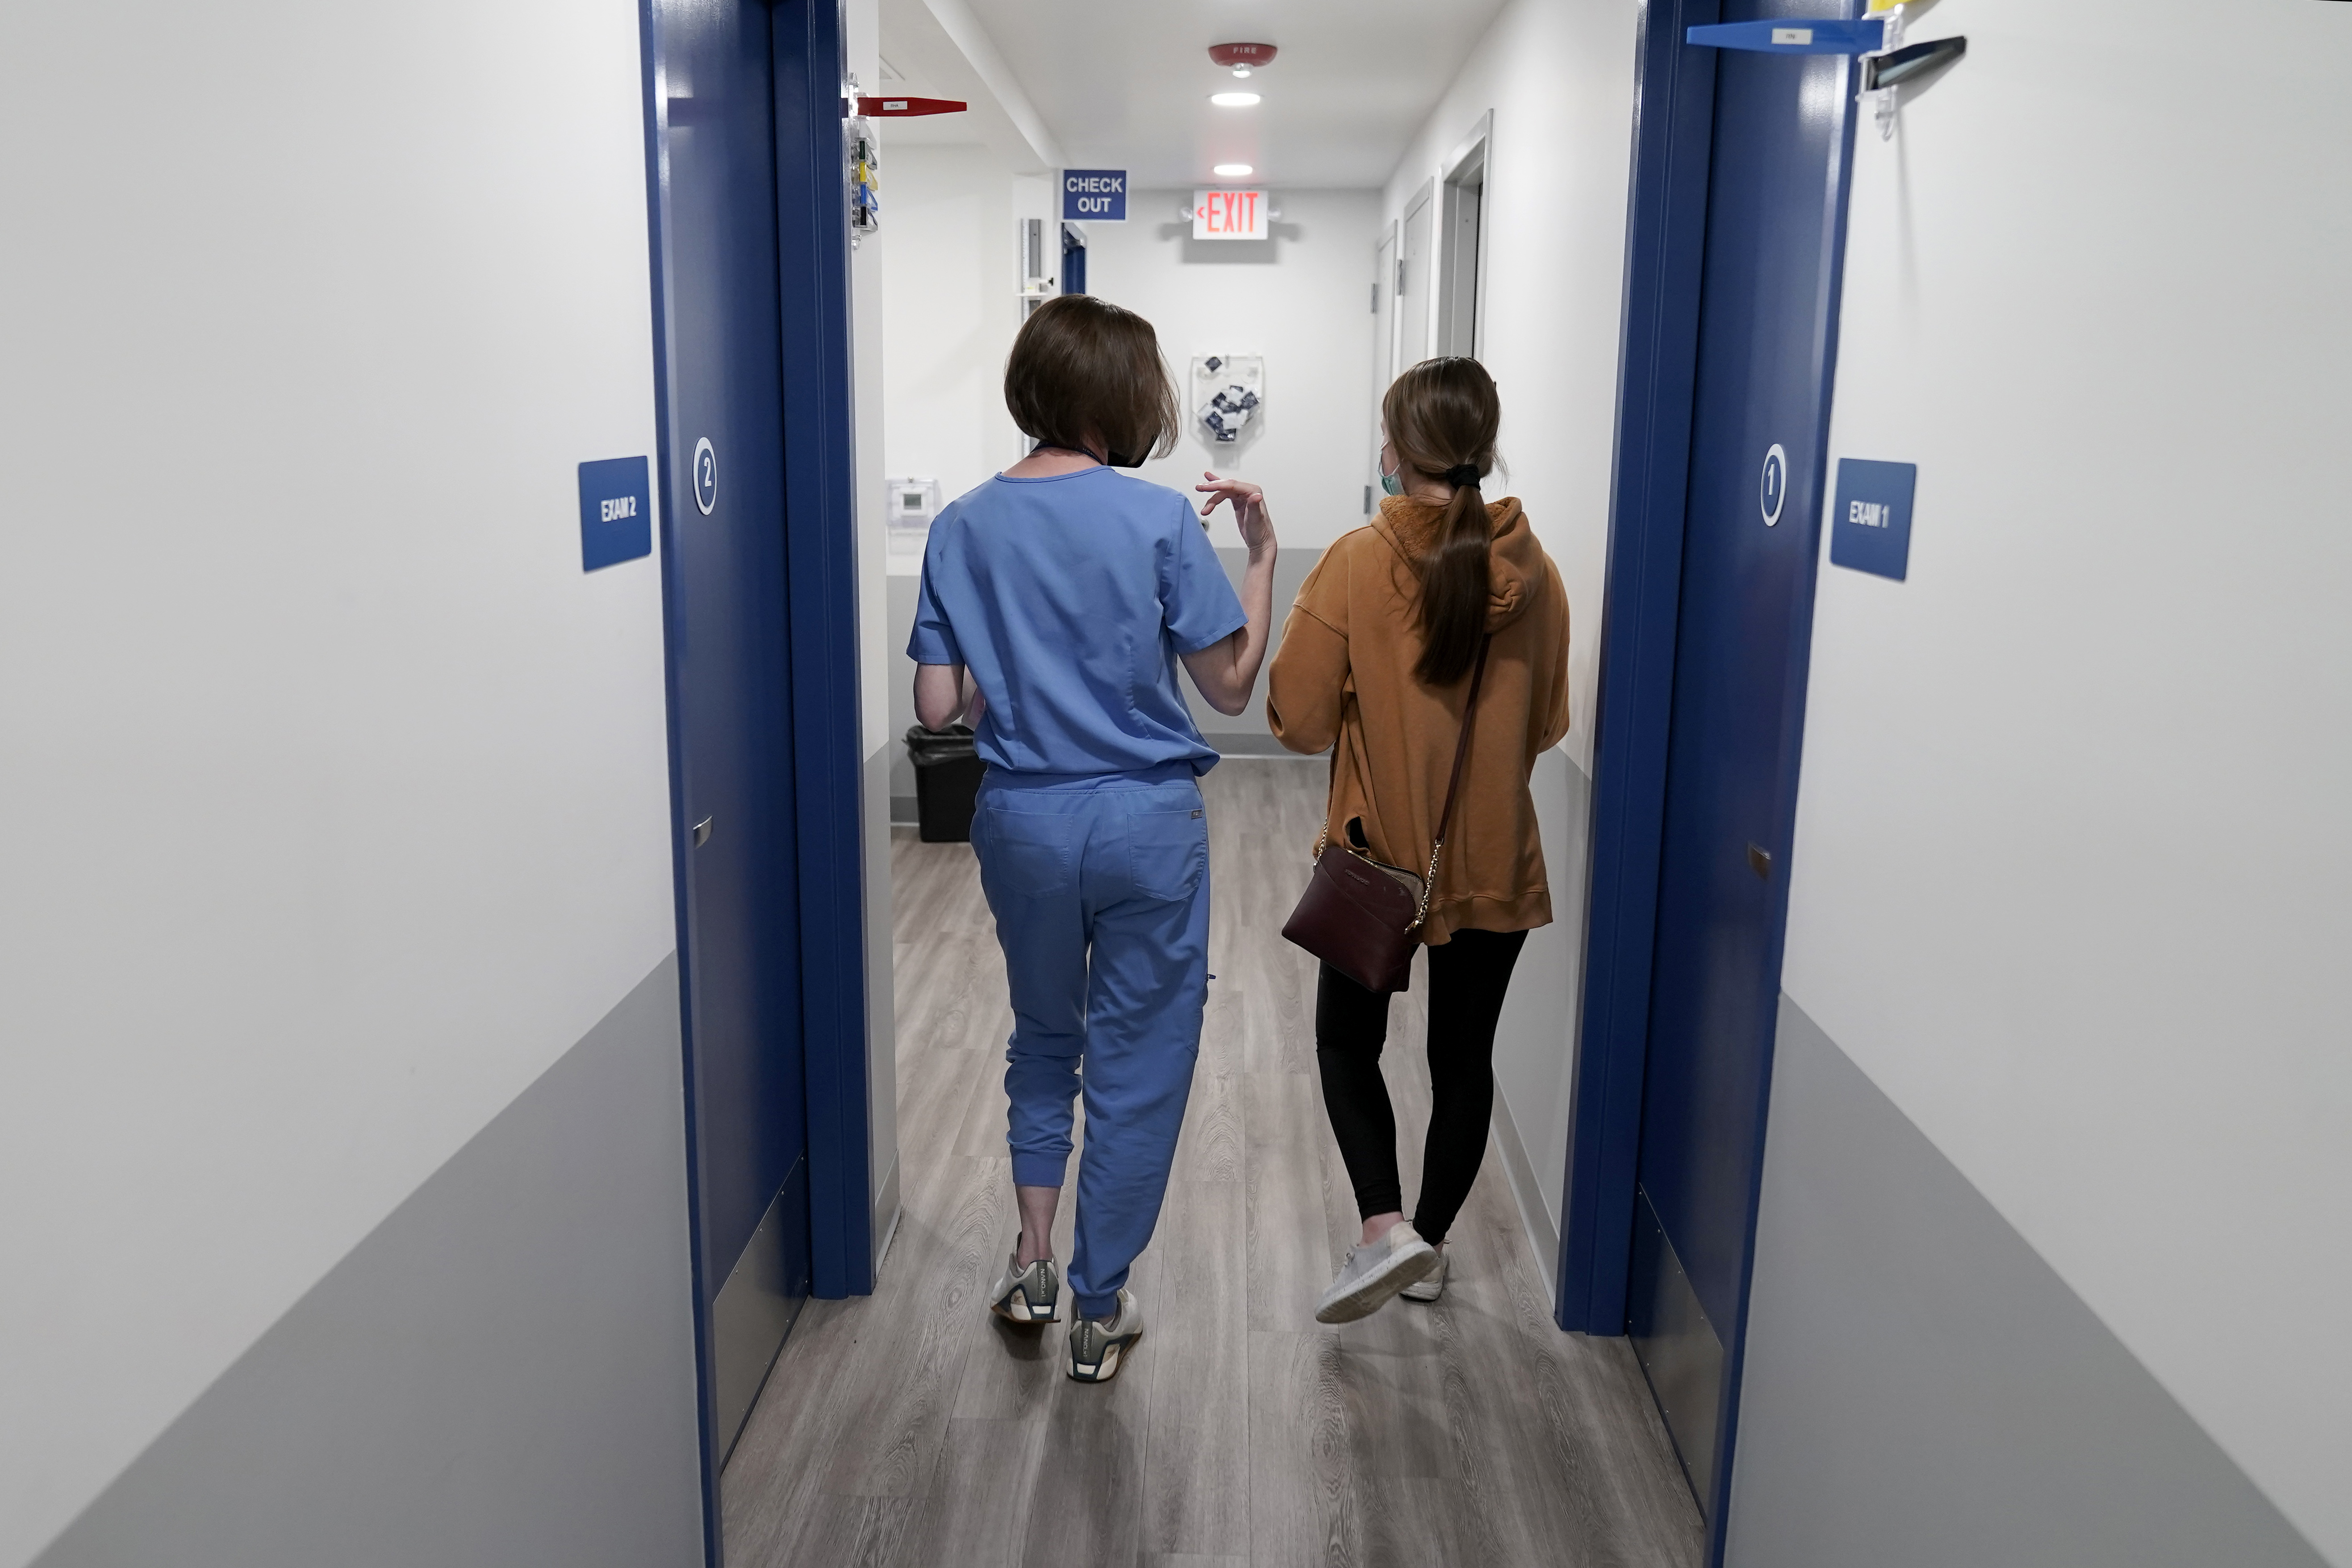 Dr. Elizabeth Brett Daily, left, walks with a patient after providing a medical abortion at a Planned Parenthood clinic Wednesday, Oct. 12, 2022, in Kansas City, Kan. (AP Photo/Charlie Riedel)